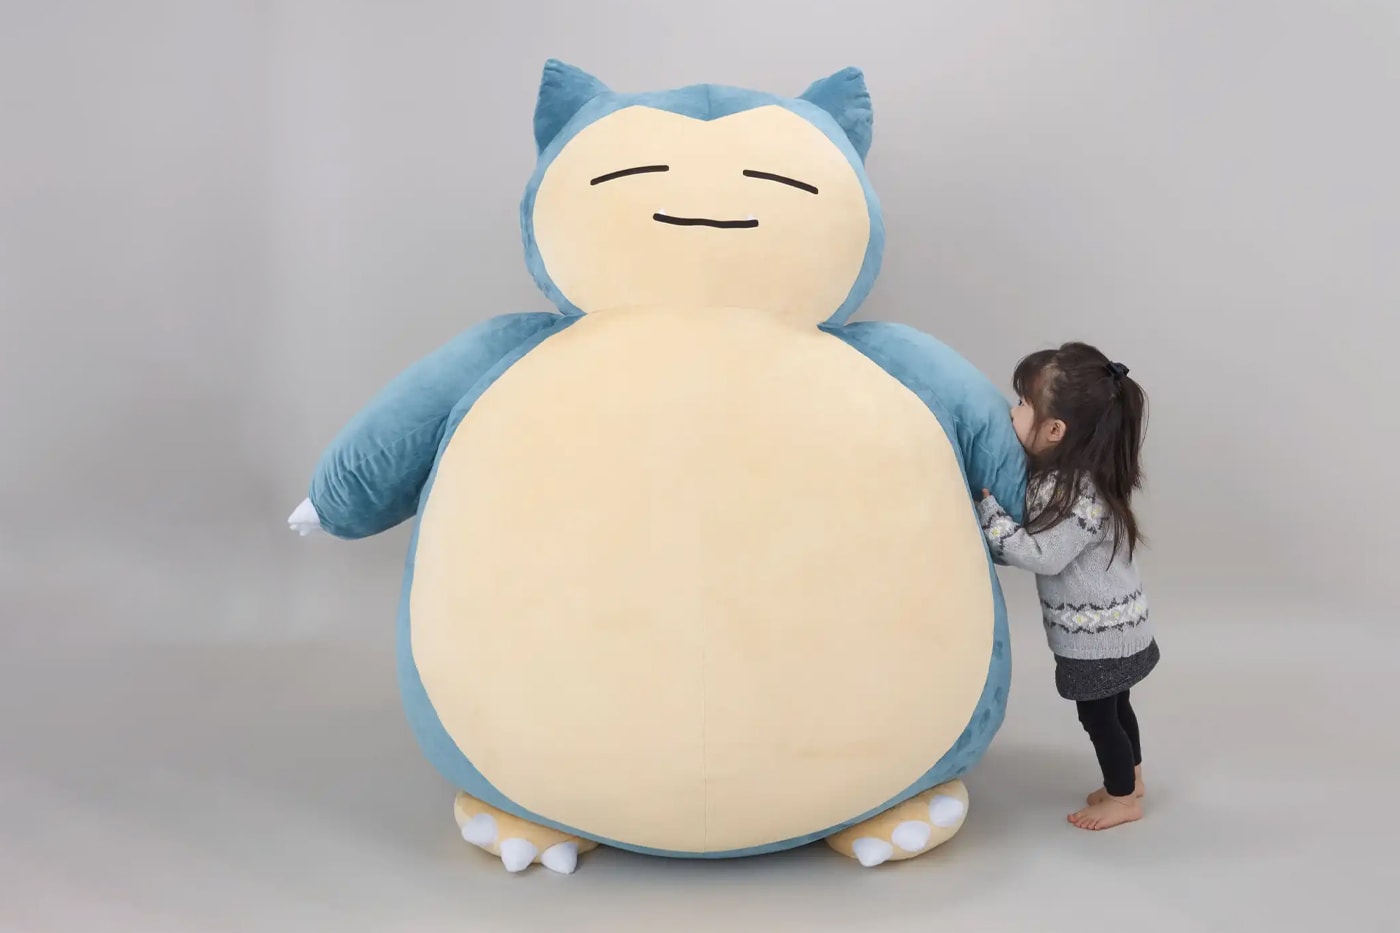 bandai the pokemon company Large Snorlax Cushion Bed Release Info 